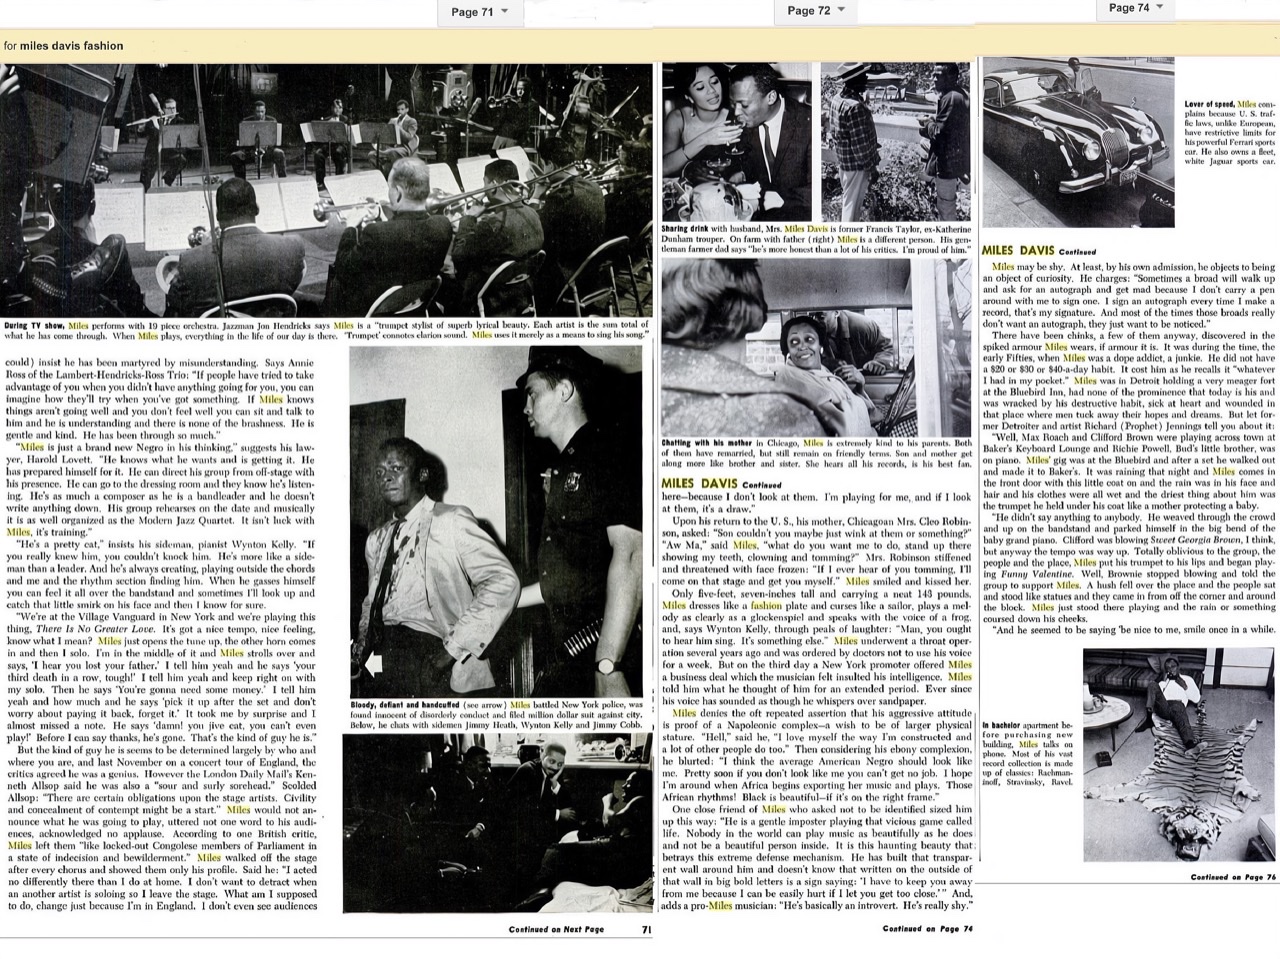 Pages 71, 74, 76 of the article in the January 1961 Ebony magazine of "Miles Davis: Evil Genius of Jazz."